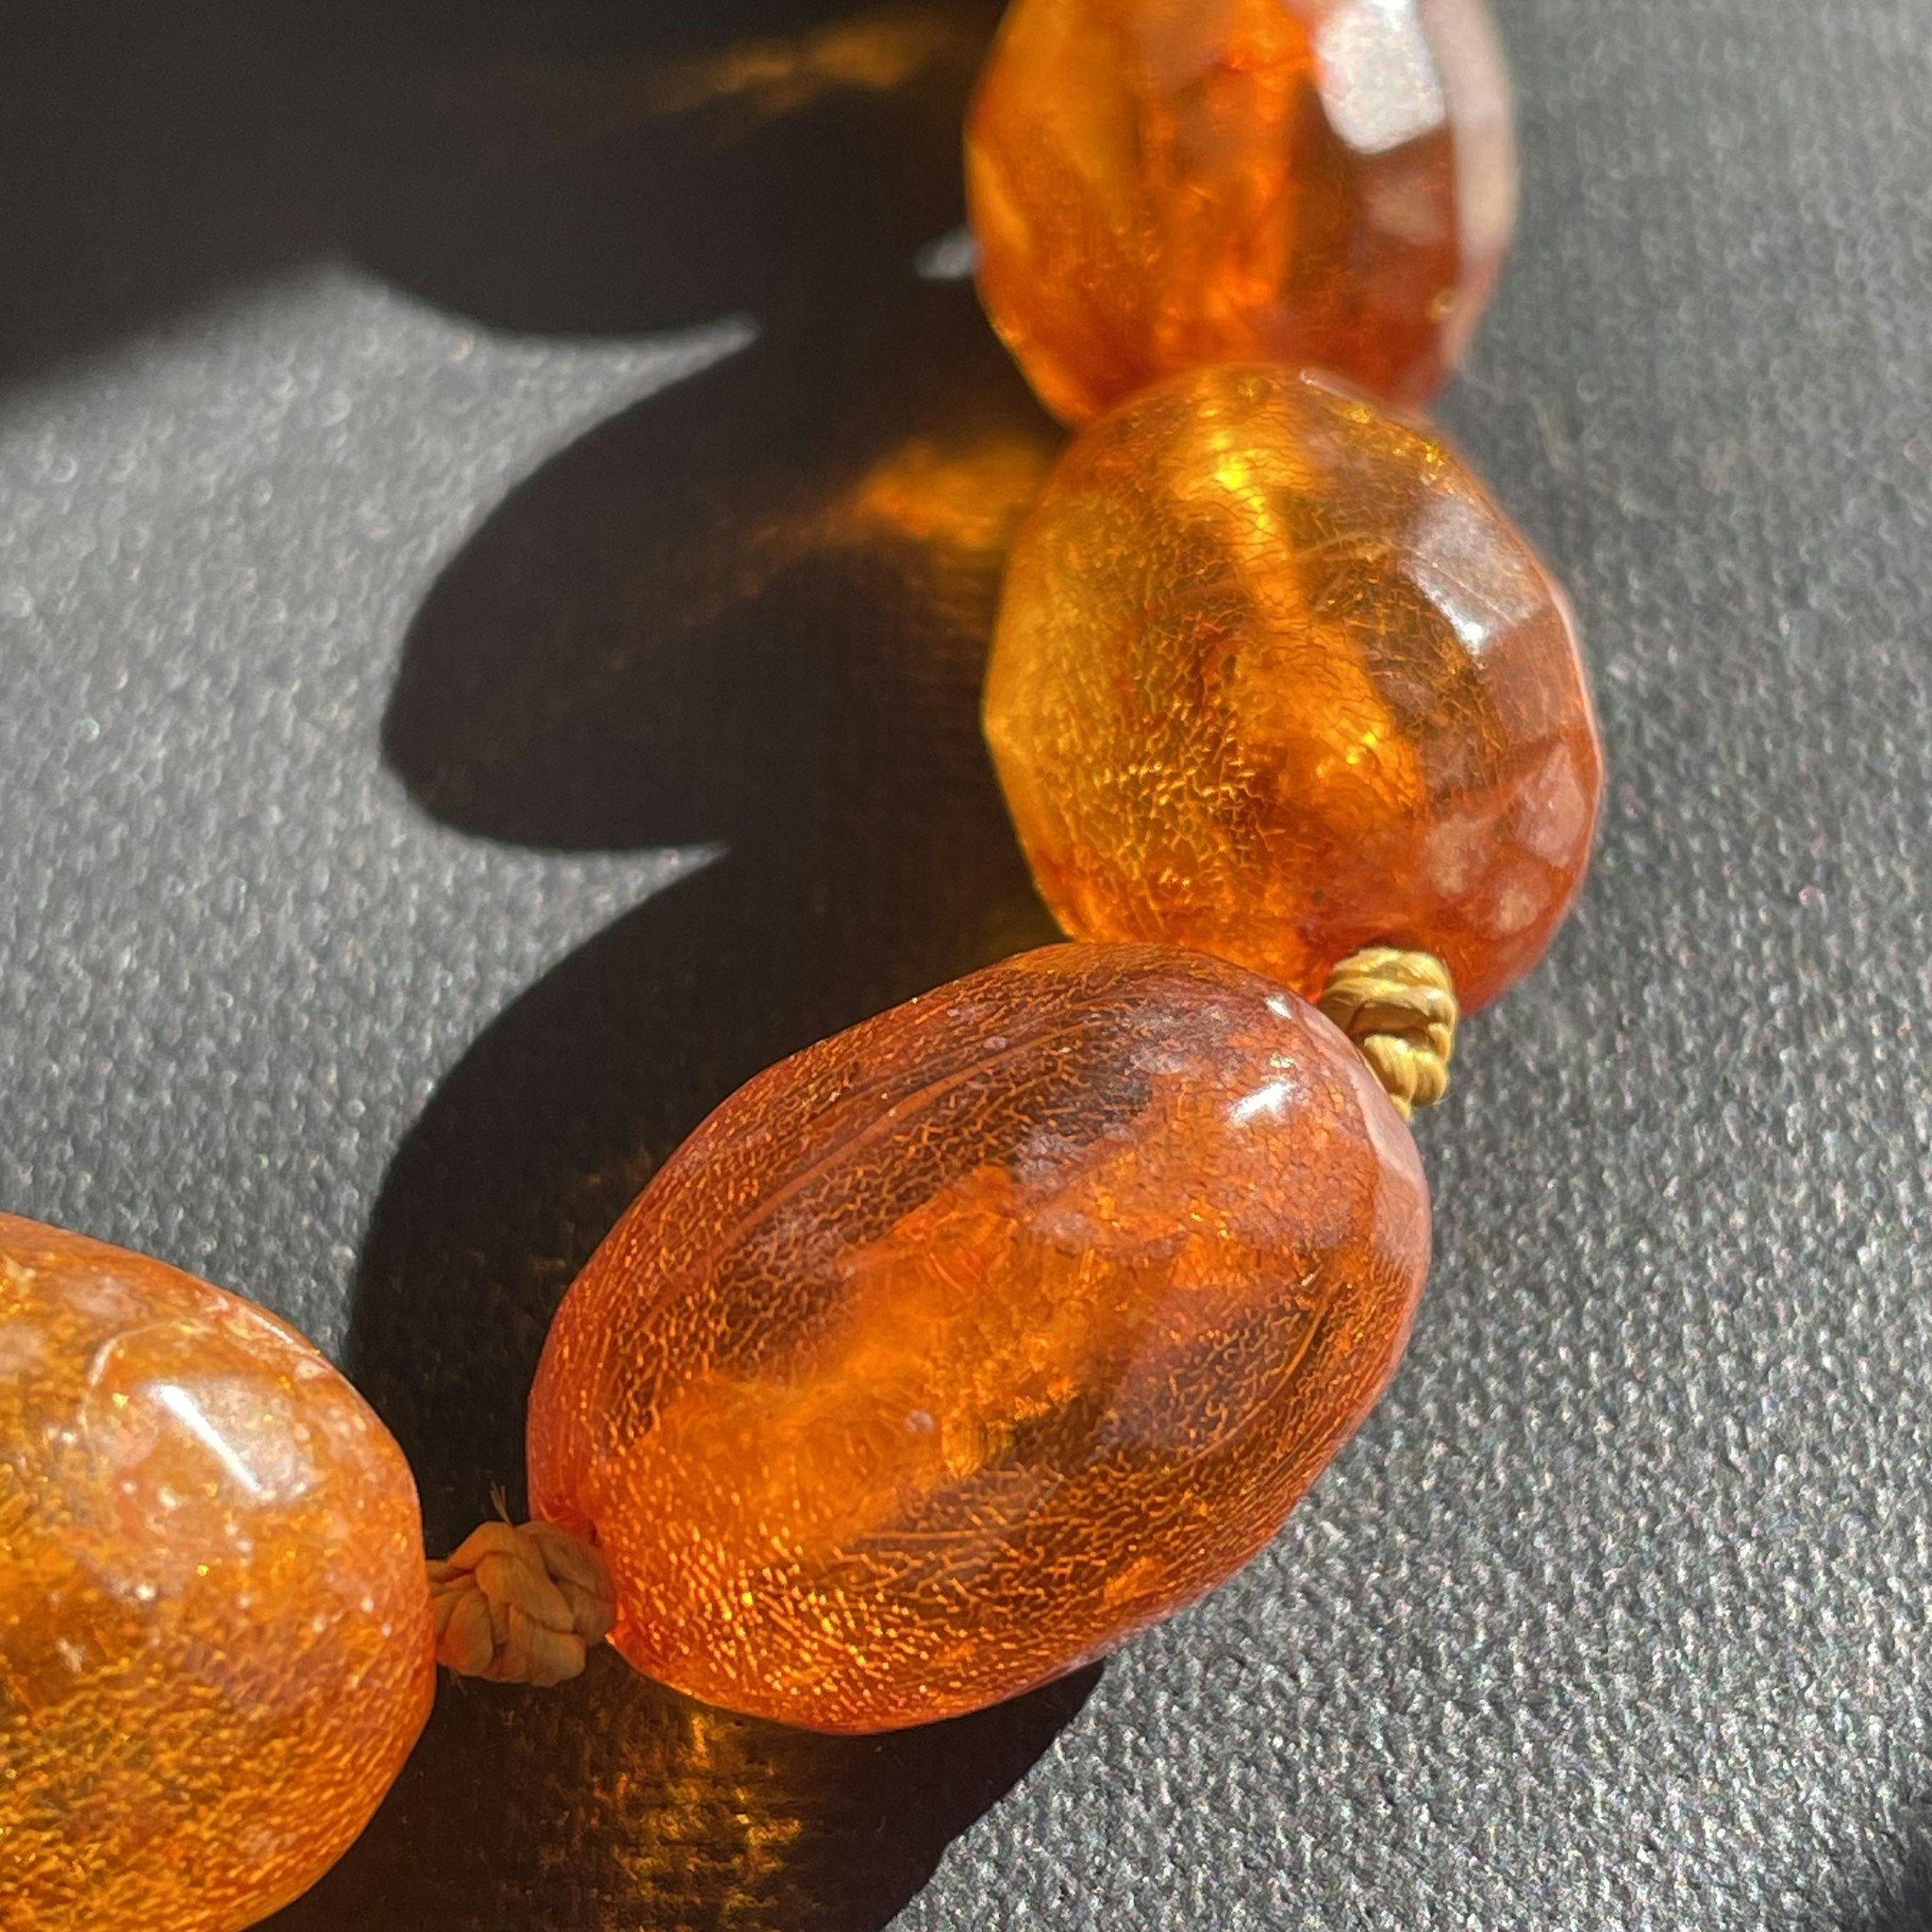 ANTIQUE NATURAL AMBER FACETED BEAD NECKLACE BRACELET FROM DENMARK 1950s #1866